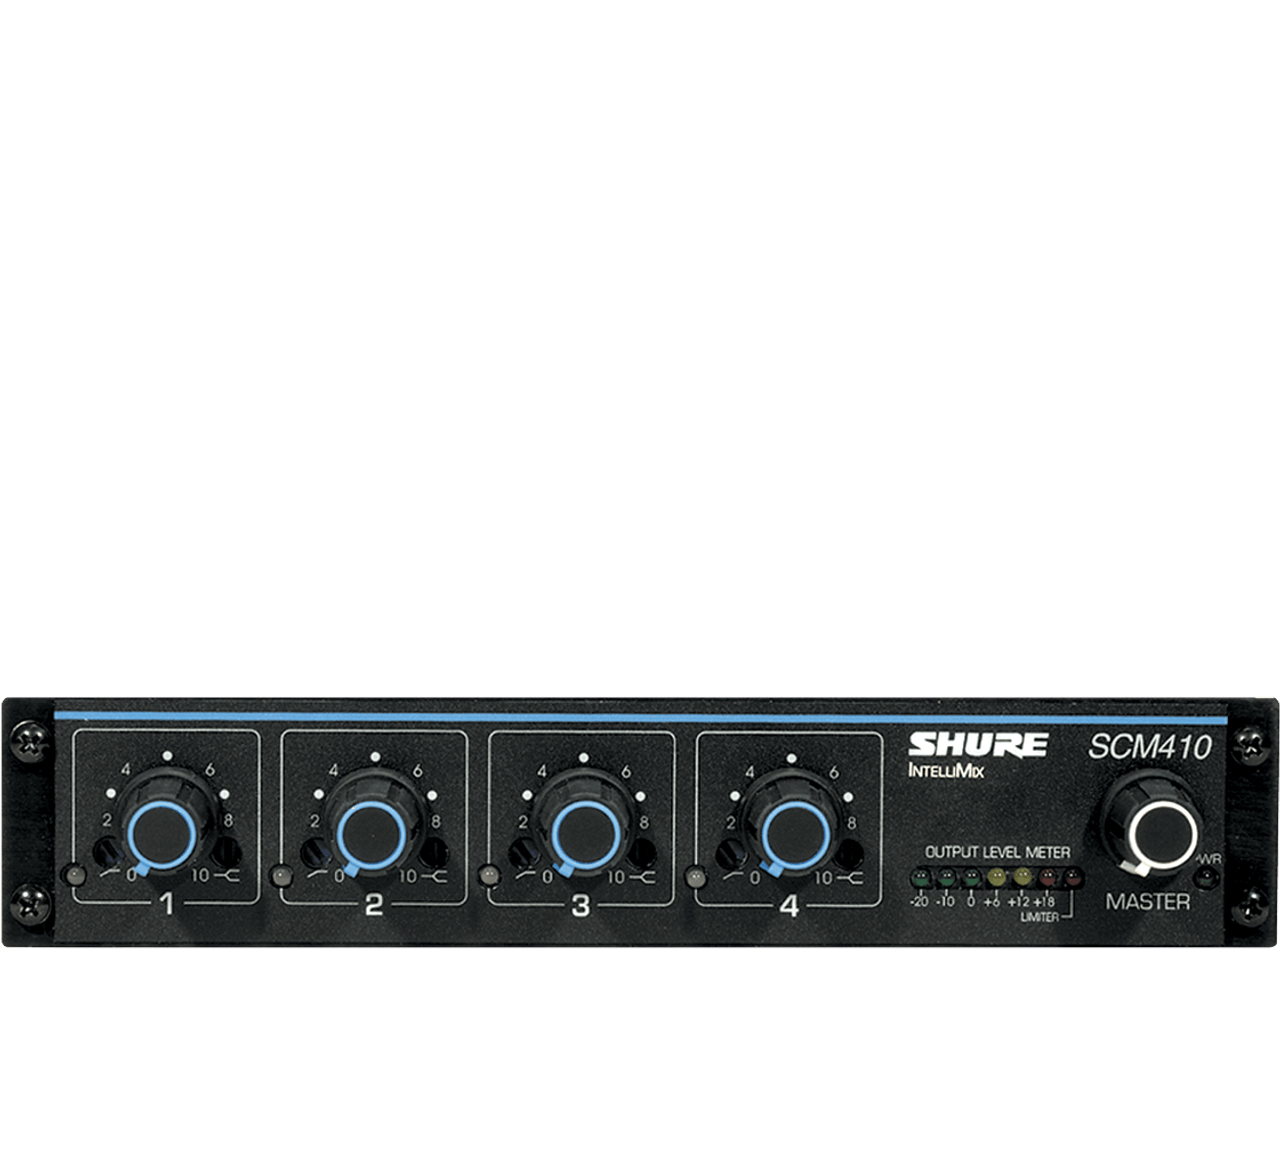 håndtering Arbitrage Antagonisme Shure SCM410 Four-Channel Automatic Microphone Mixer (110V) with Logic  Control and EQ per Channel AC only Half Rack Space Single and Dual Mount